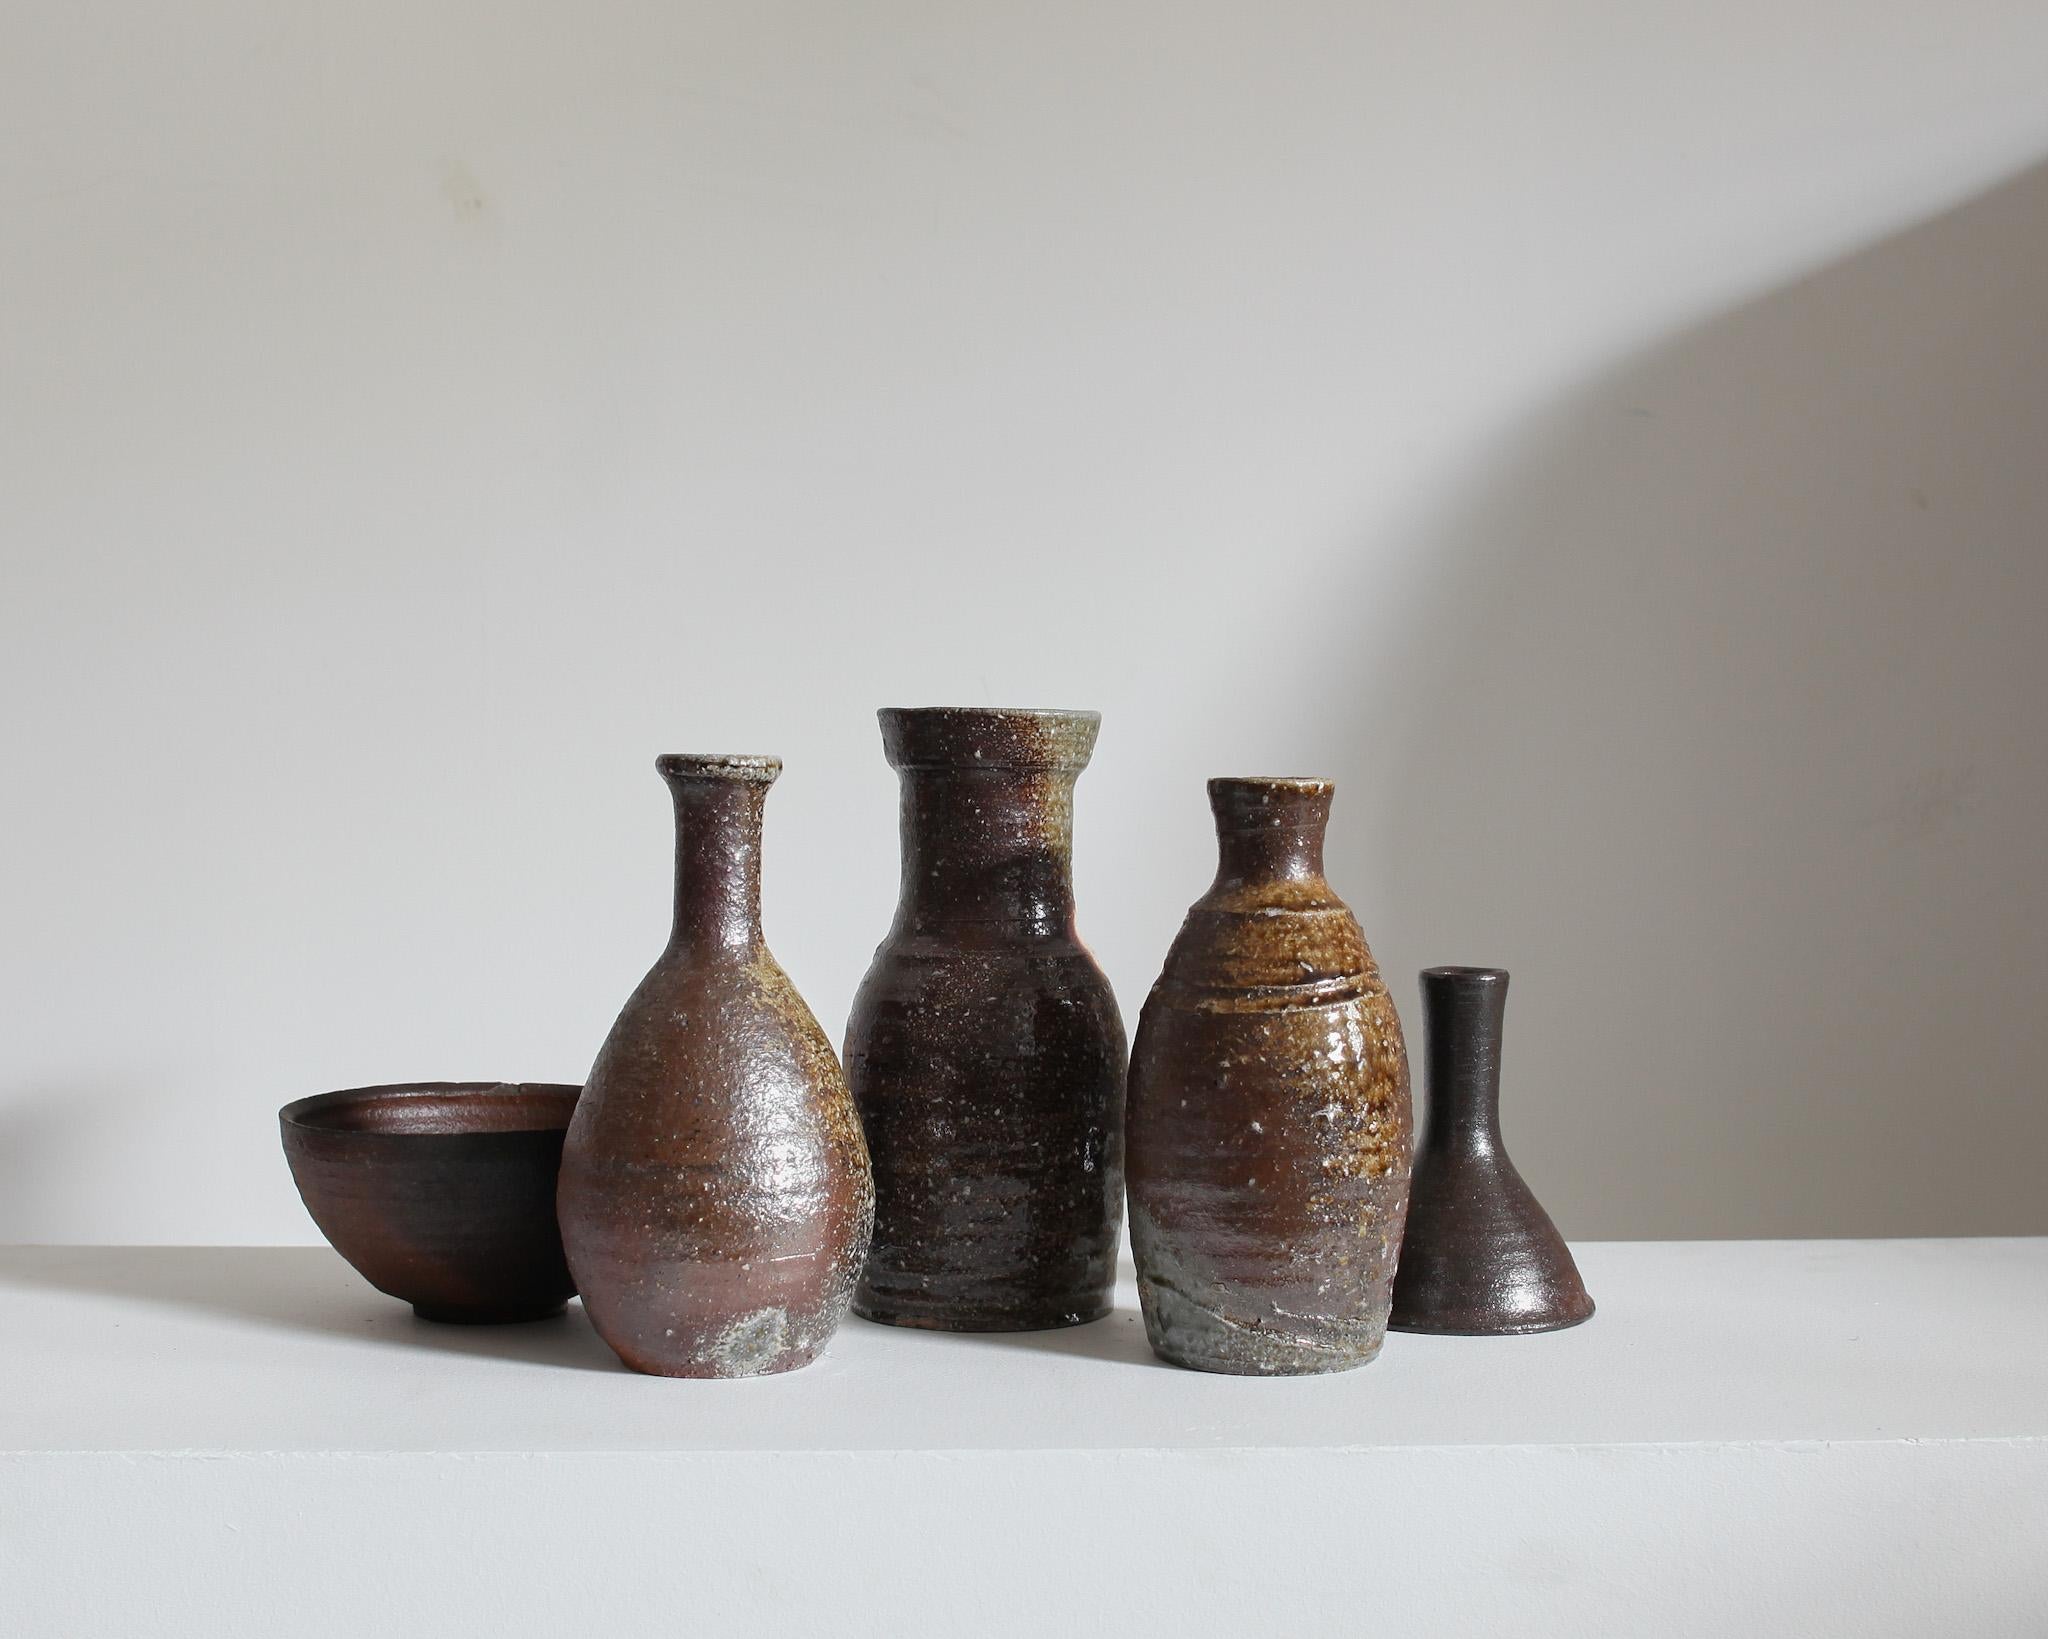 A collection of five unique stoneware/ceramic vessels from the famous pottery town of Mashiko, Japan.

Sourced from the former studio of a Mashiko lifetime potter.

These tactile vessels all display an earthy wabi-sabi aesthetic.

Most of the